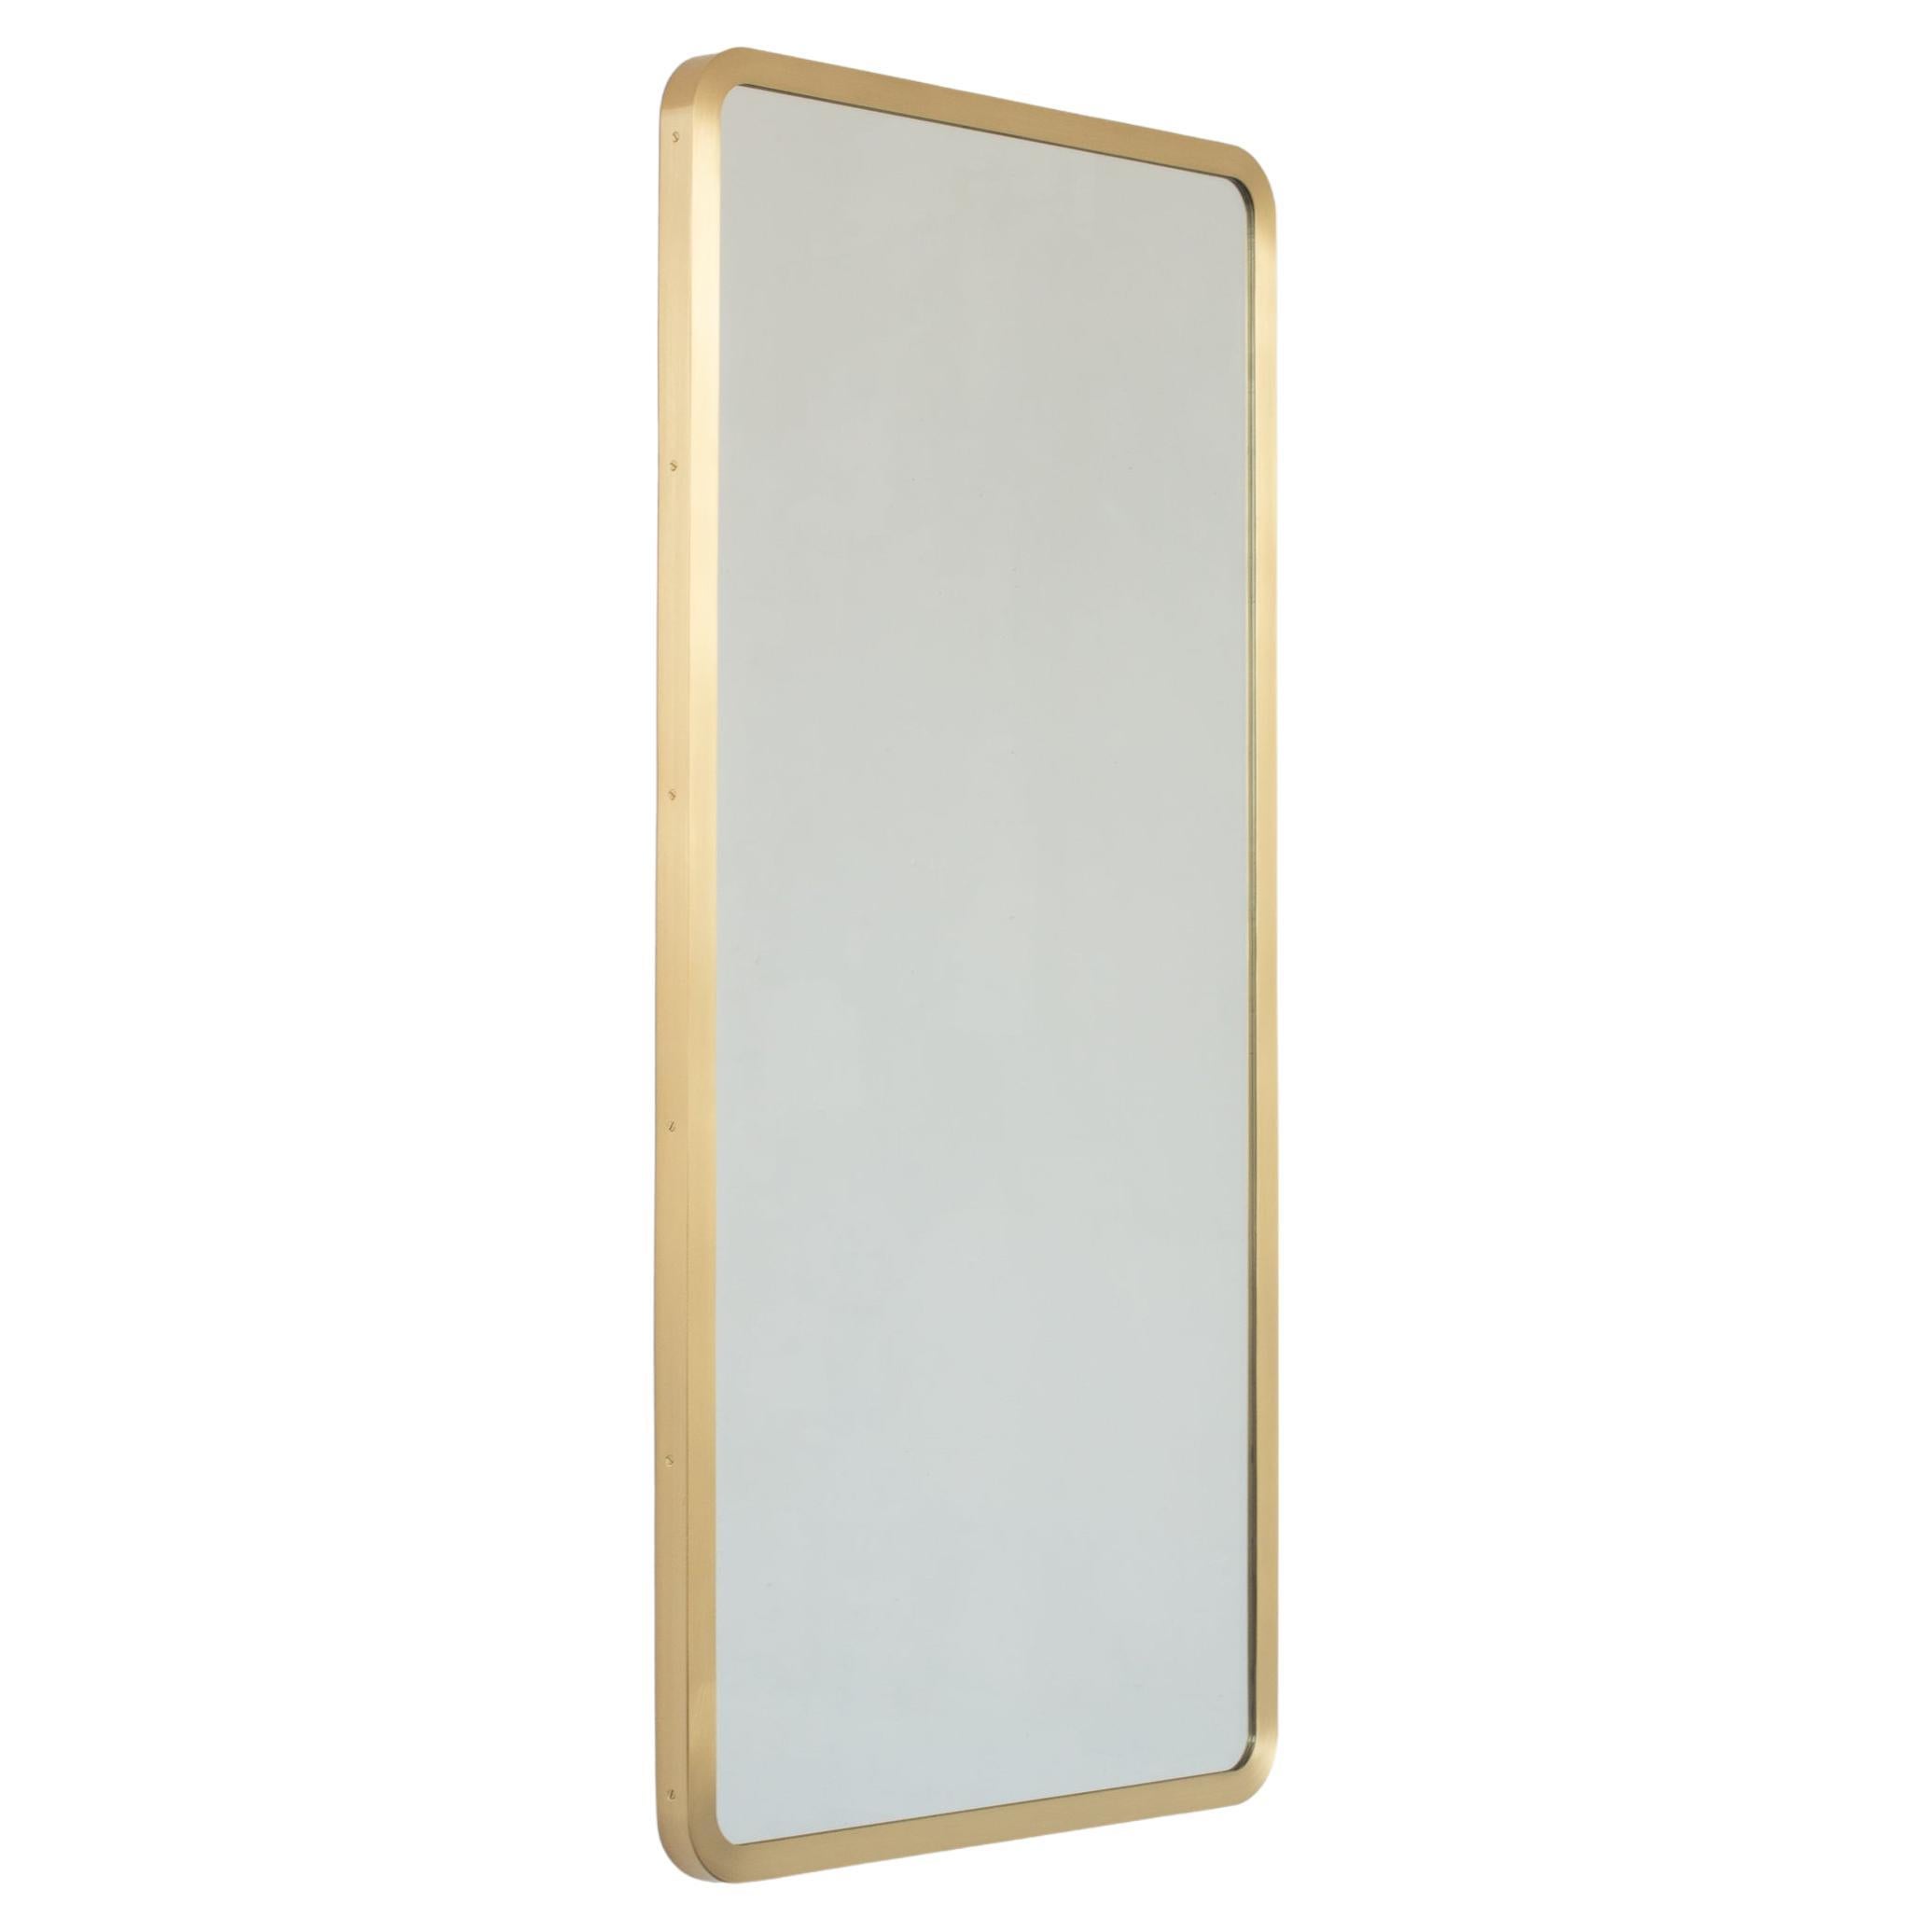 Quadris Rectangular Art Deco Mirror with a Full Front Brass Frame, Large For Sale